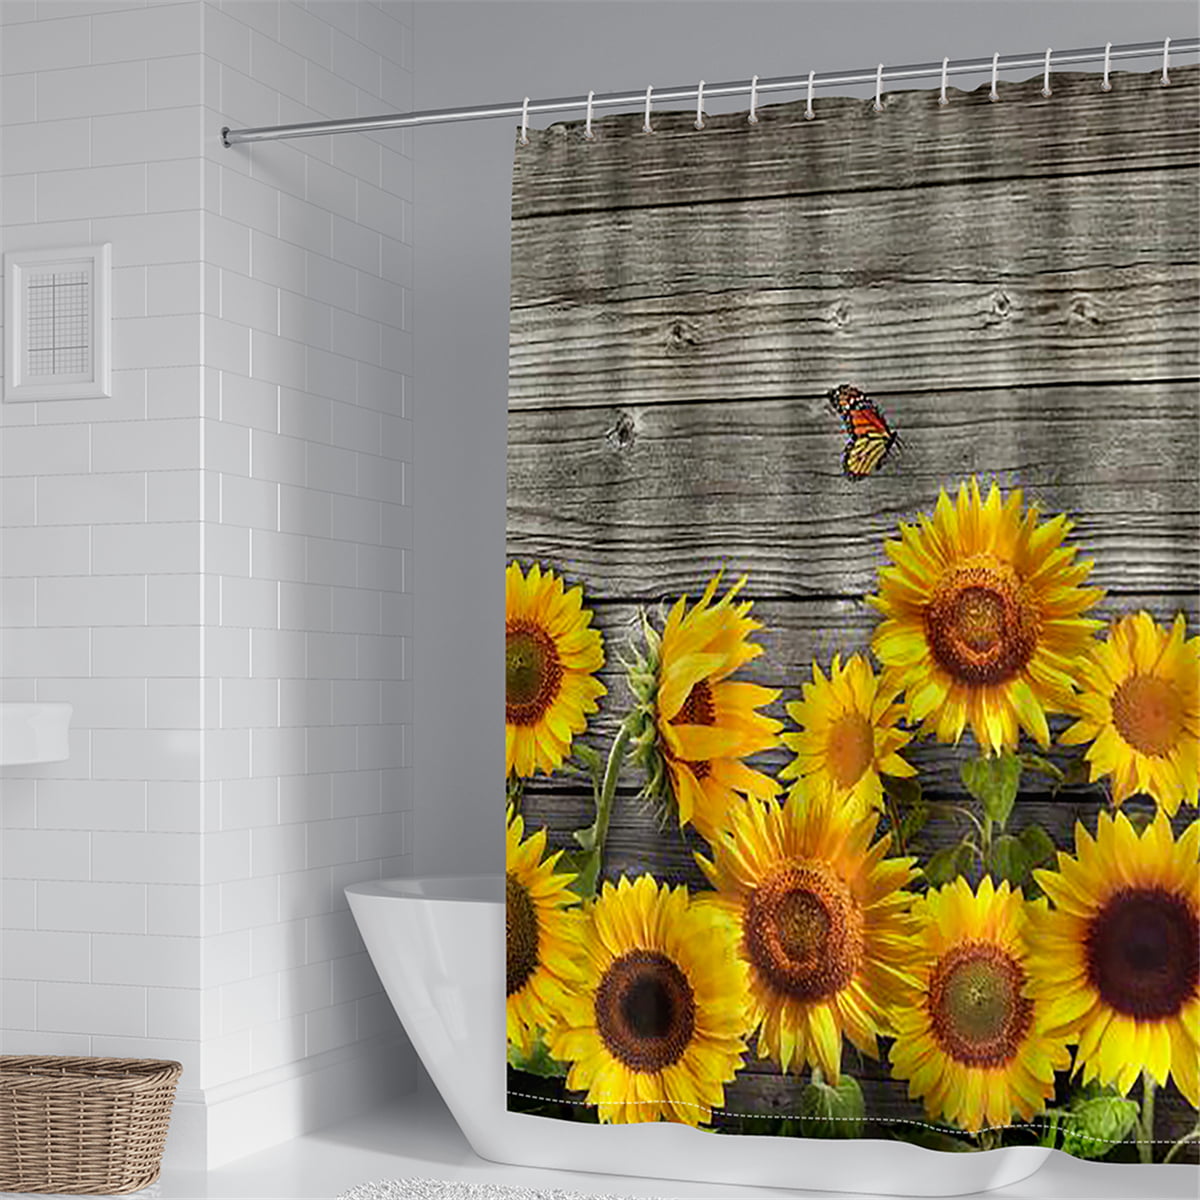 Details about   Small Daisy Yellow Flowers in Black Fabric Shower Curtain Bathroom Toilet Rug 